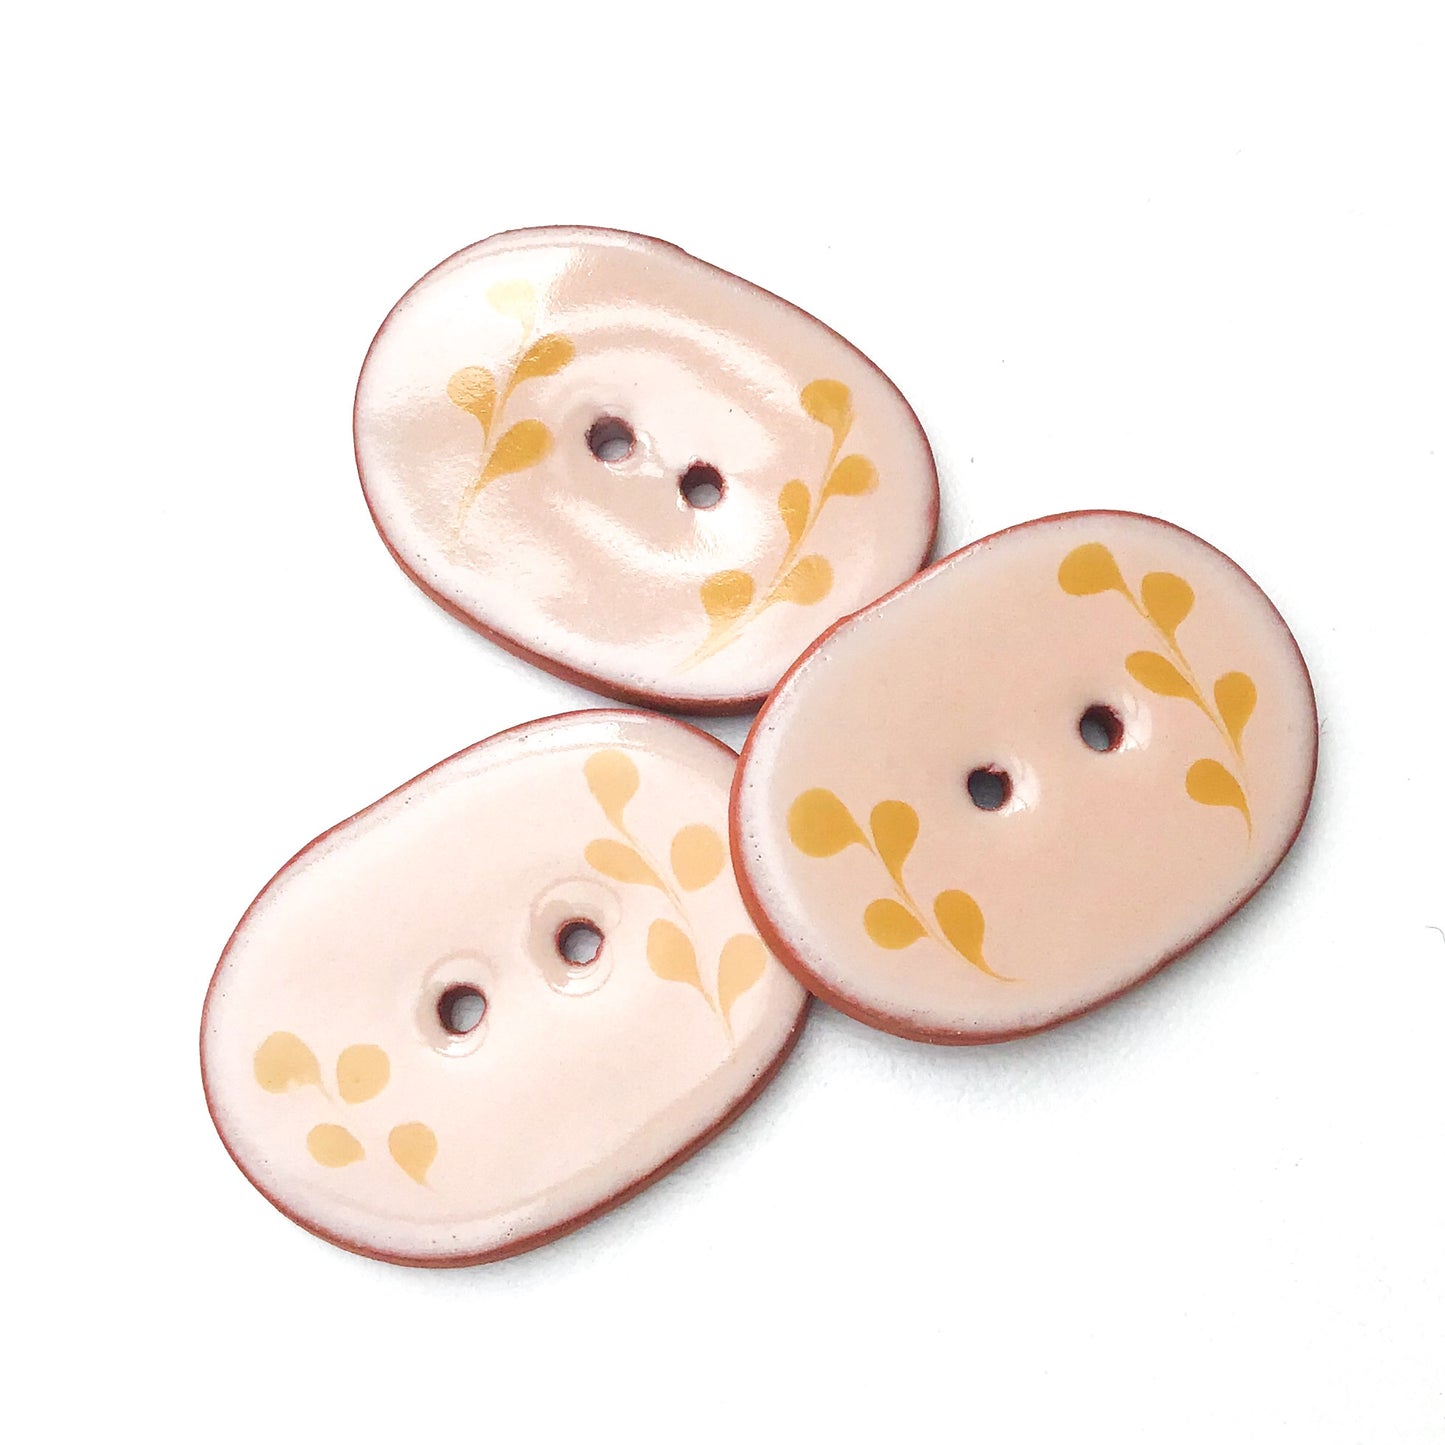 Beige  & Golden Brown Ceramic Buttons - Oval Clay Buttons - 1" x 1 1/4"